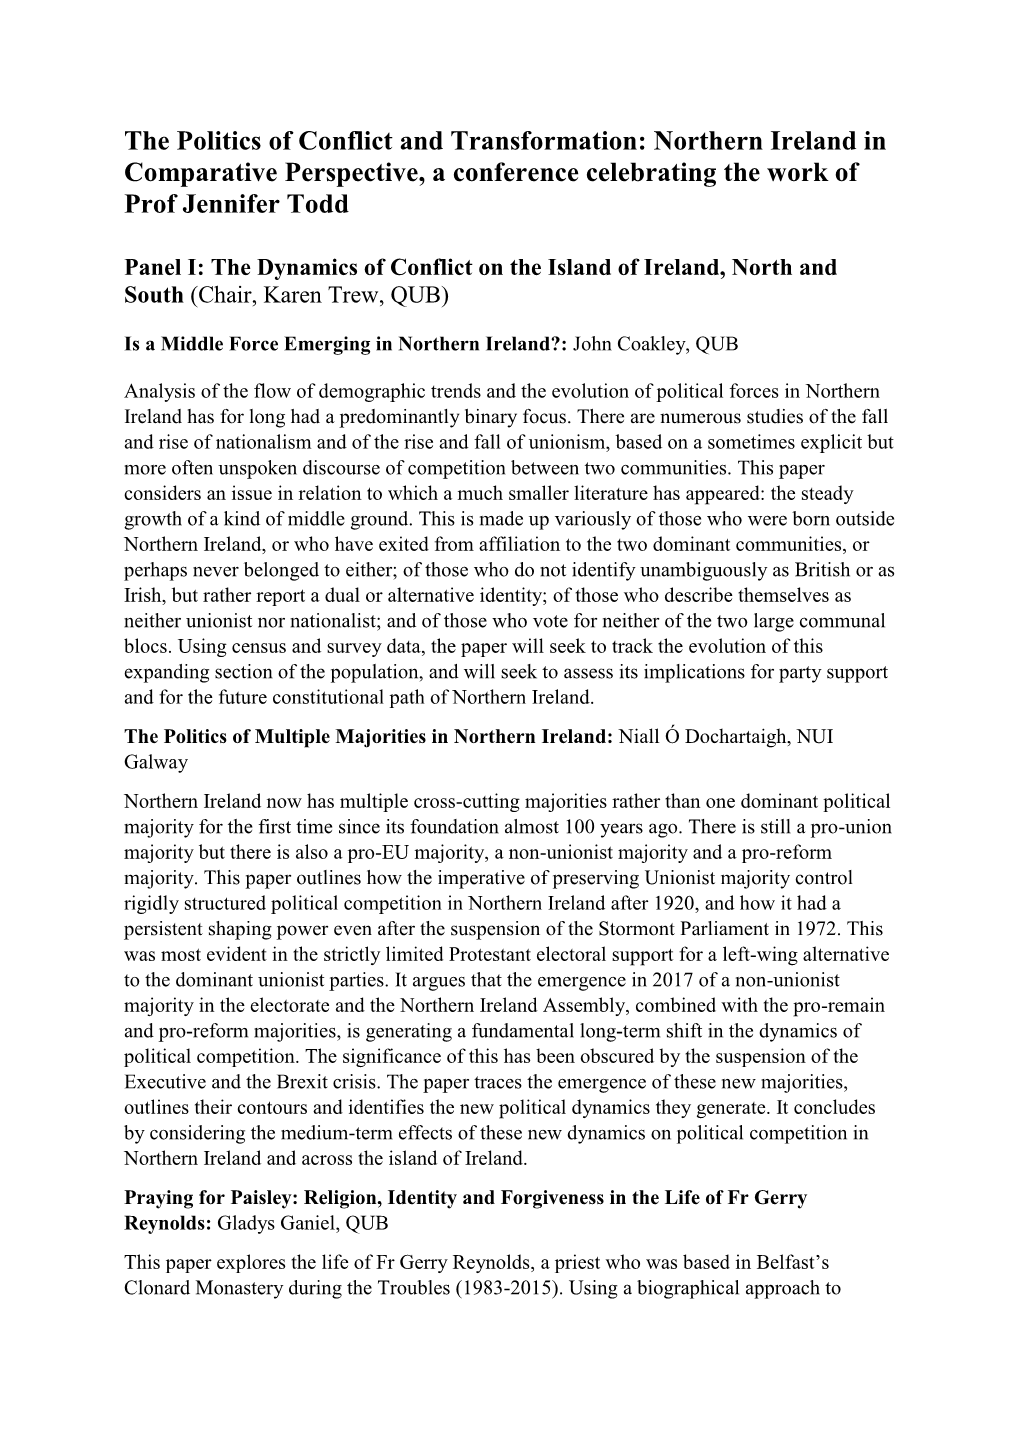 The Politics of Conflict and Transformation: Northern Ireland in Comparative Perspective, a Conference Celebrating the Work of Prof Jennifer Todd